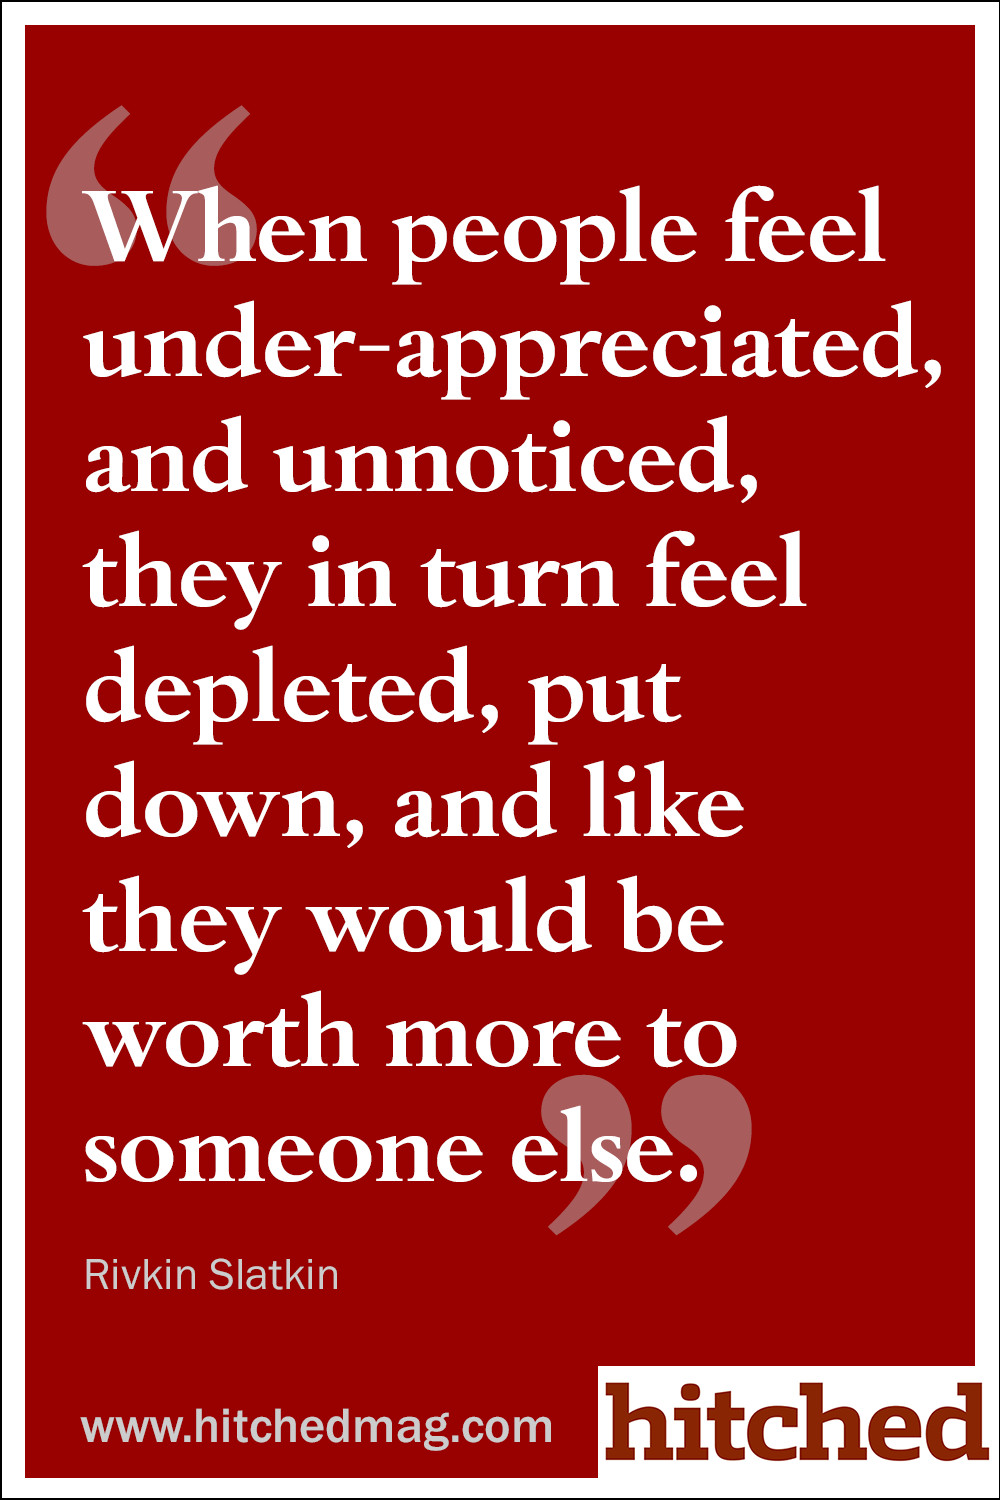 Quotes About Not Being Appreciated In A Relationship
 Feeling Under appreciated & Undervalued